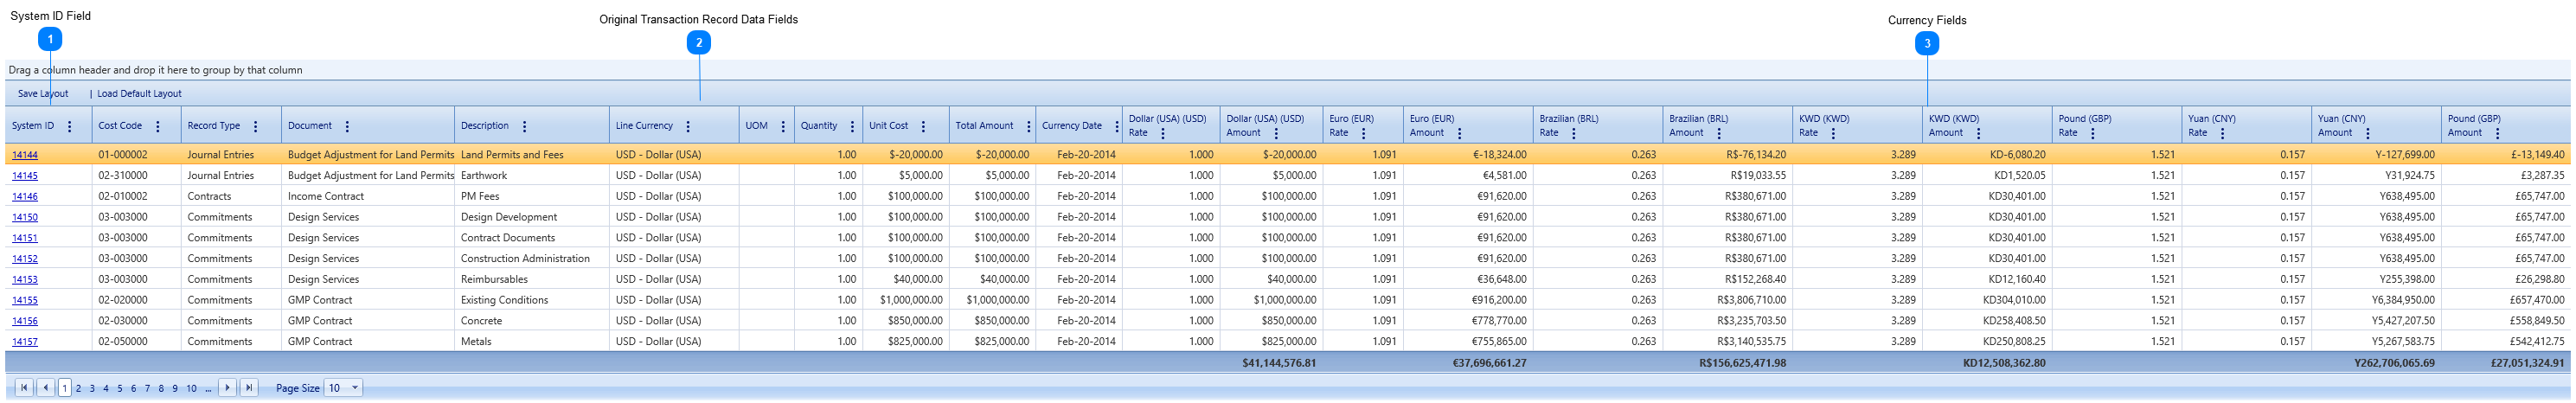 Cost Ledger Converted Details Table